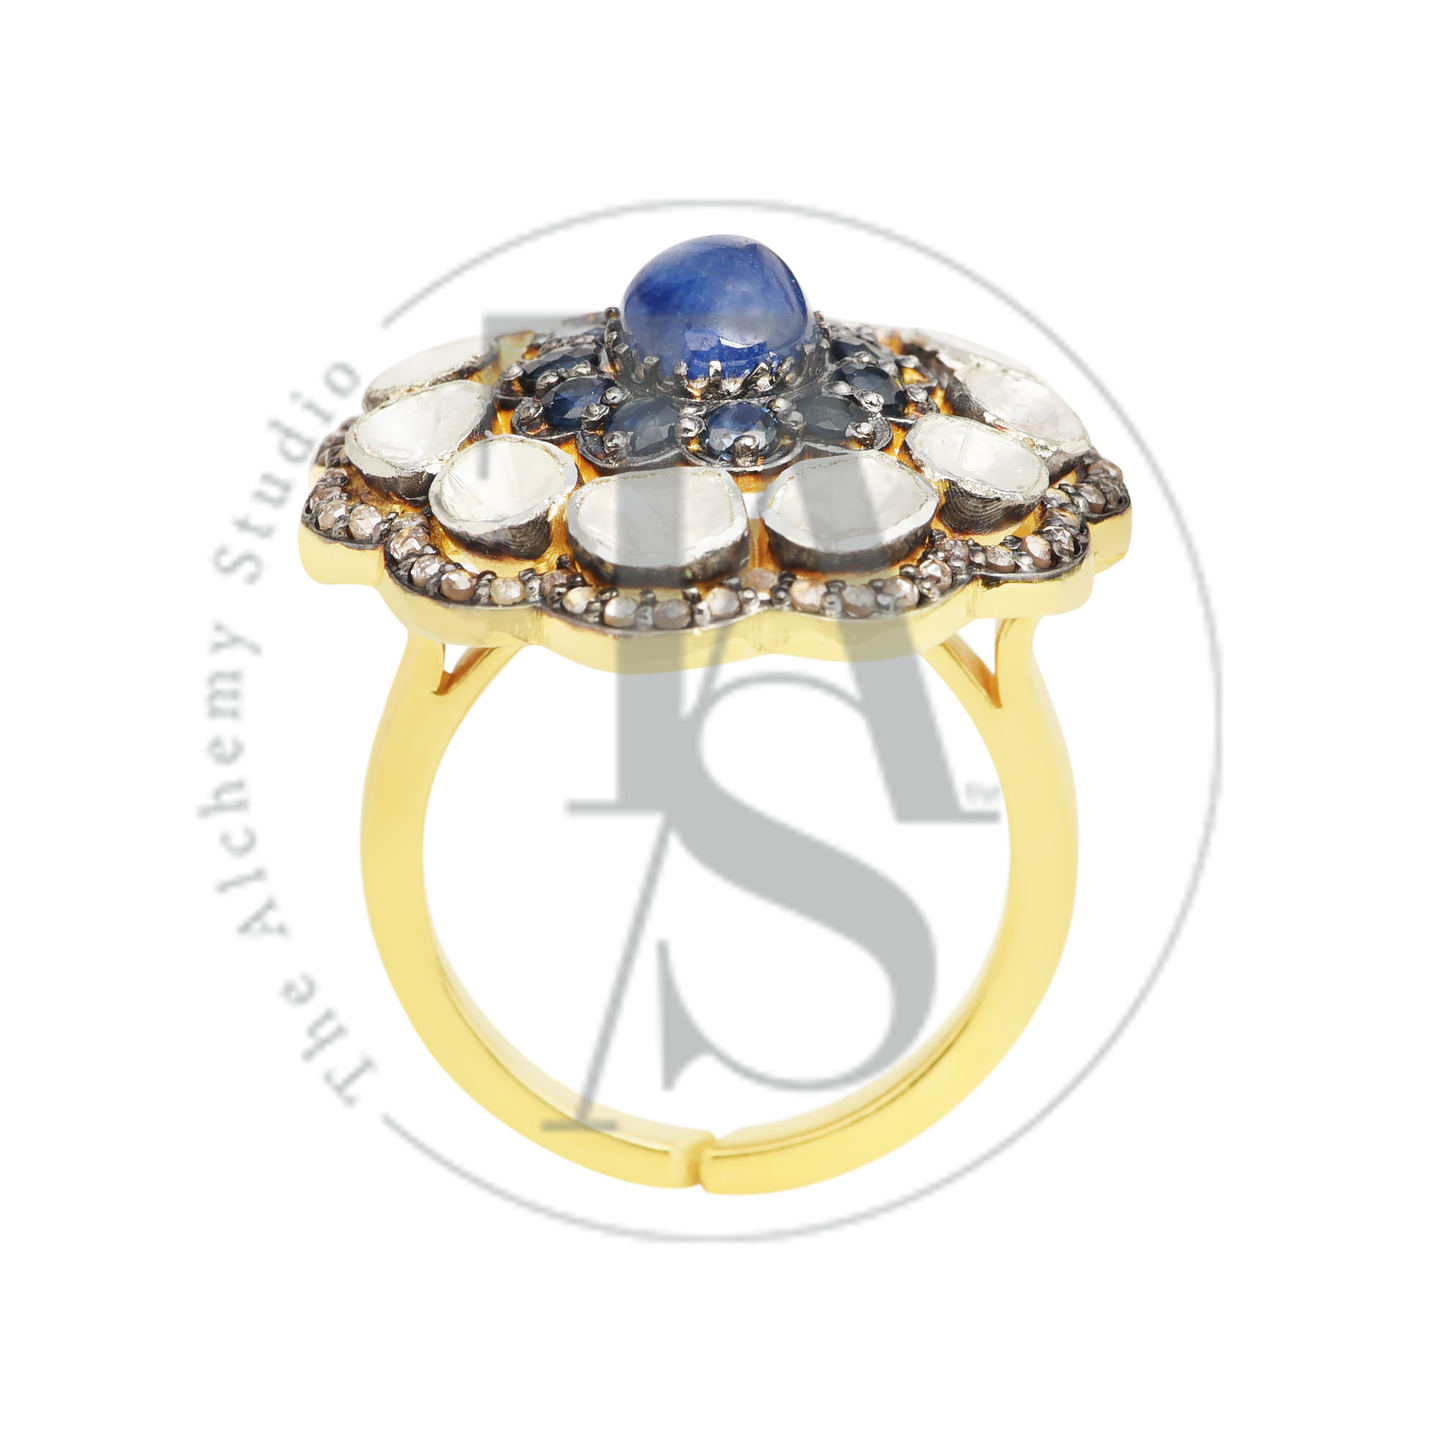 Astrales Flower Sapphire And Uncut Diamond Ring